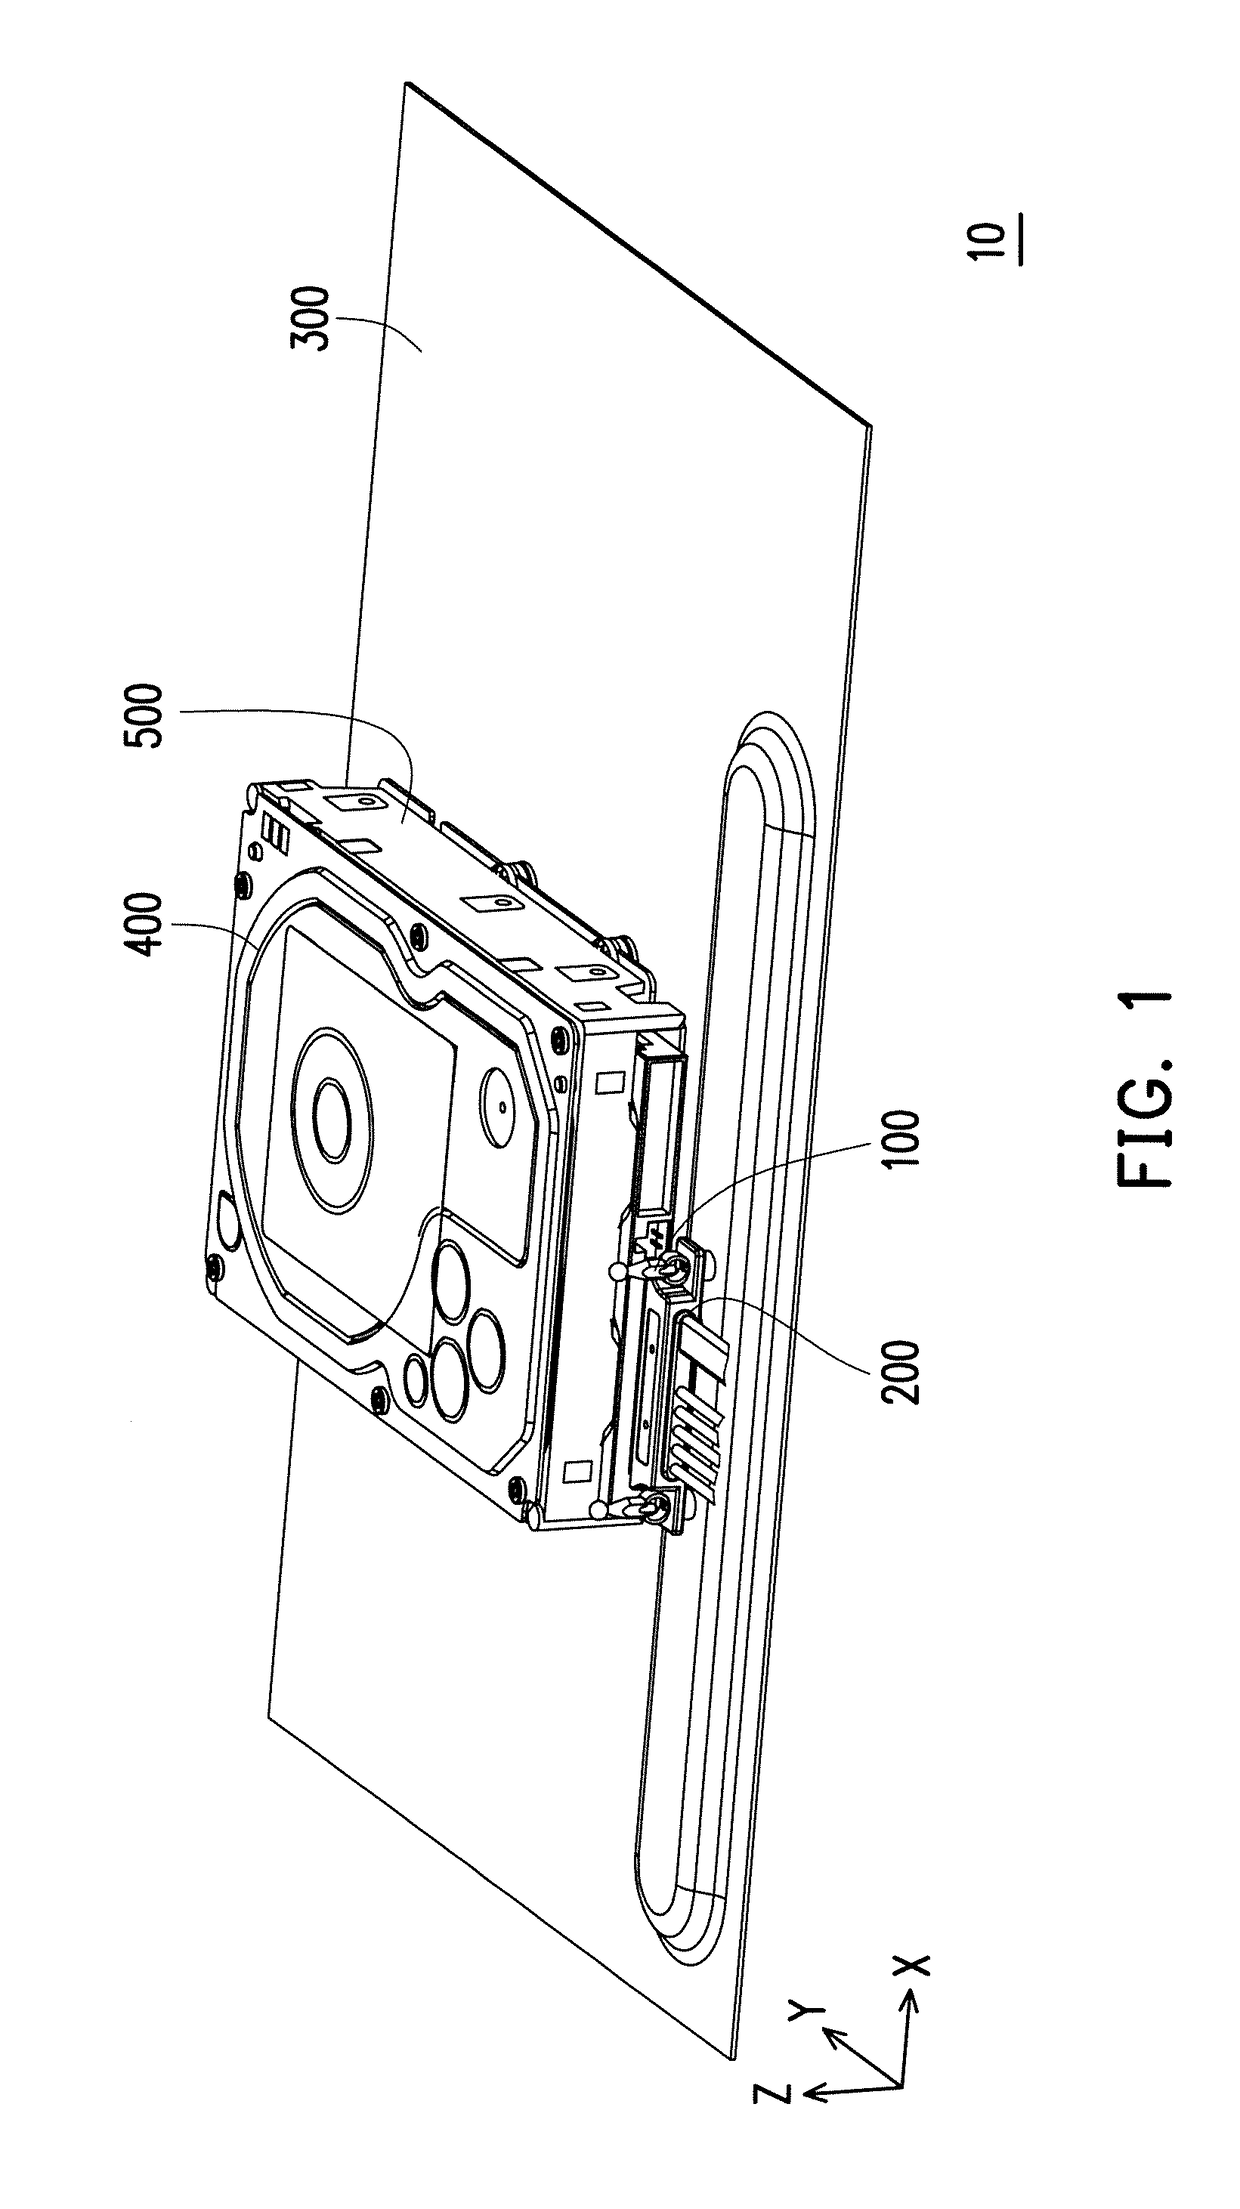 Fastening structure, electronic assembly and operating method of fastening structure